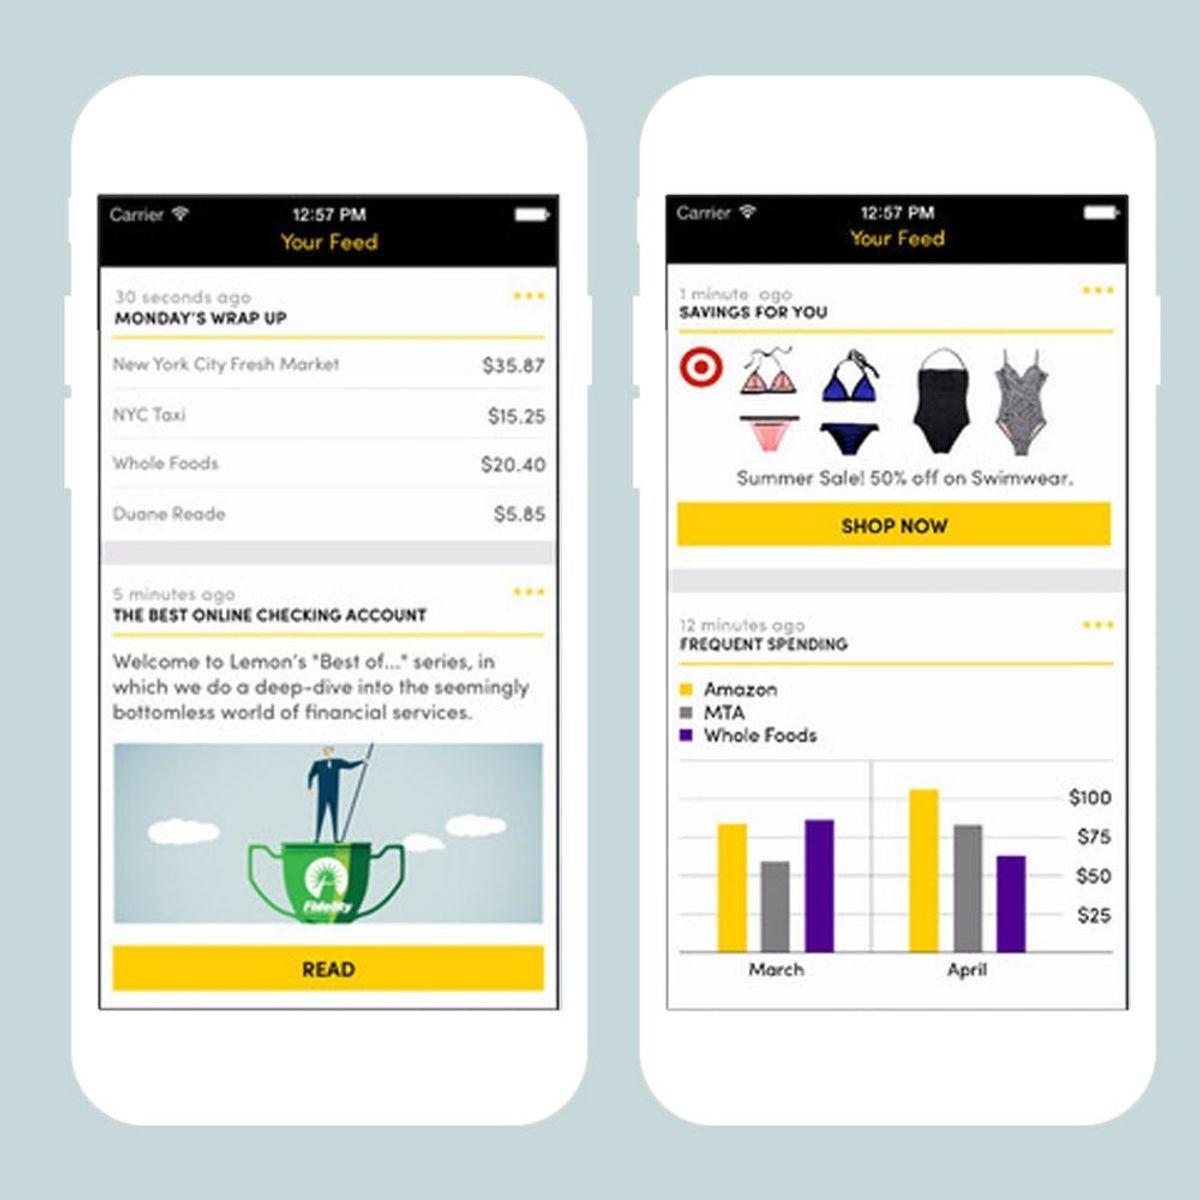 WHAT: This New Finance App Will Help You Save Money WHILE Encouraging You to Shop